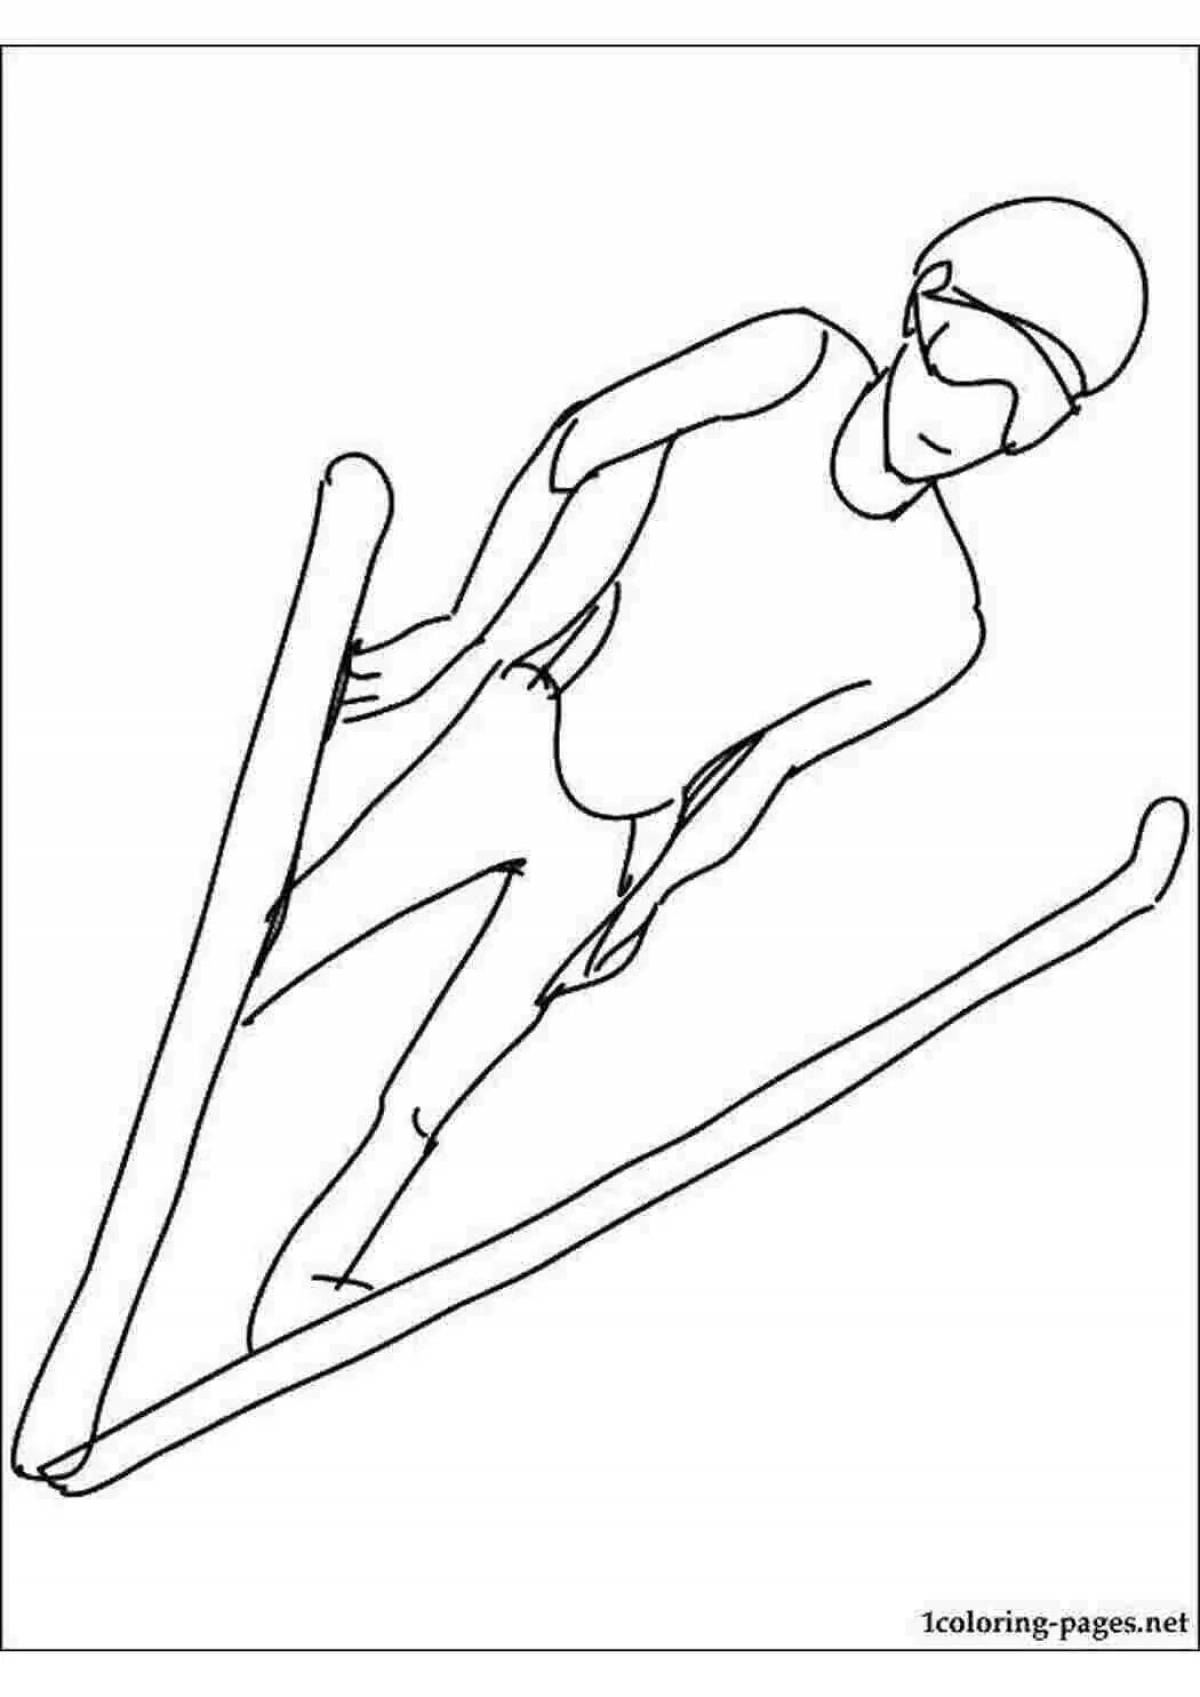 Exquisite ski jumping coloring page